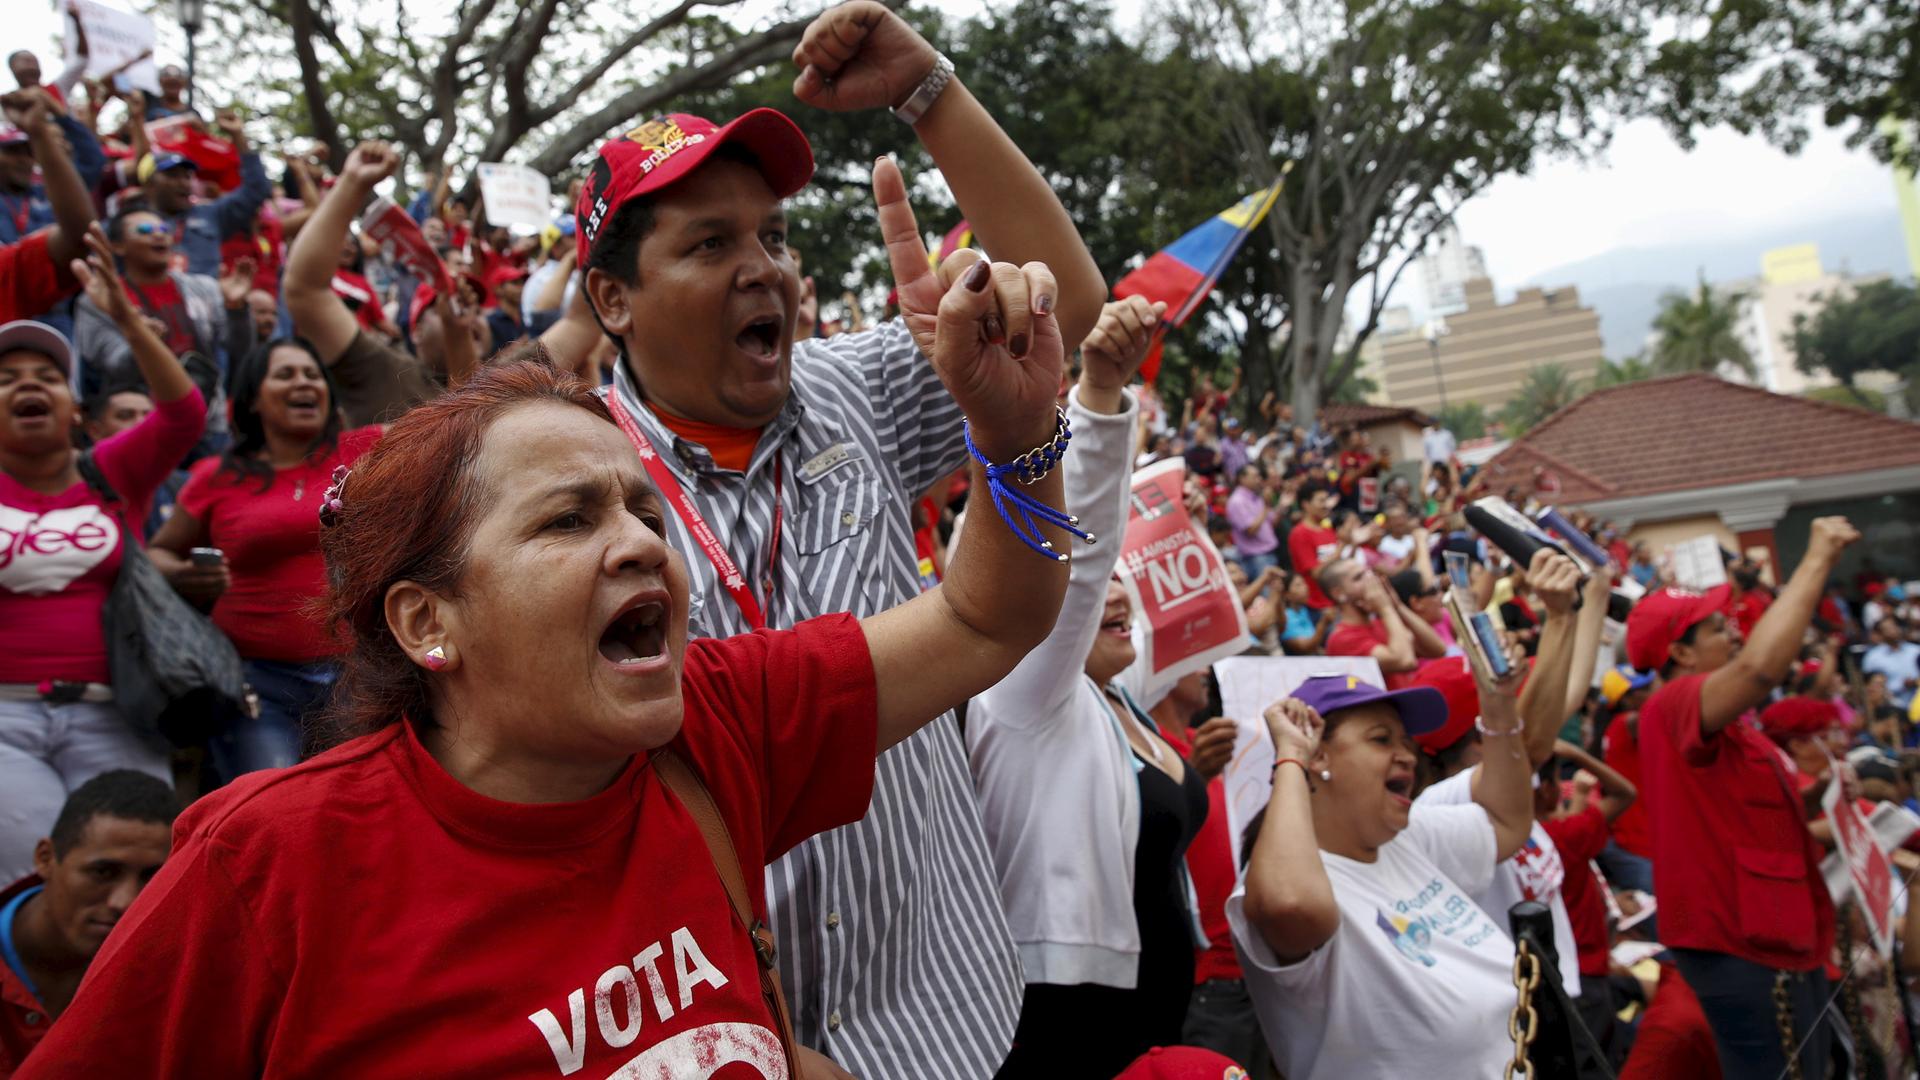 Supporters of Venezuela's President, Nicolas Maduro, during a rally in Caracas, Thursday.